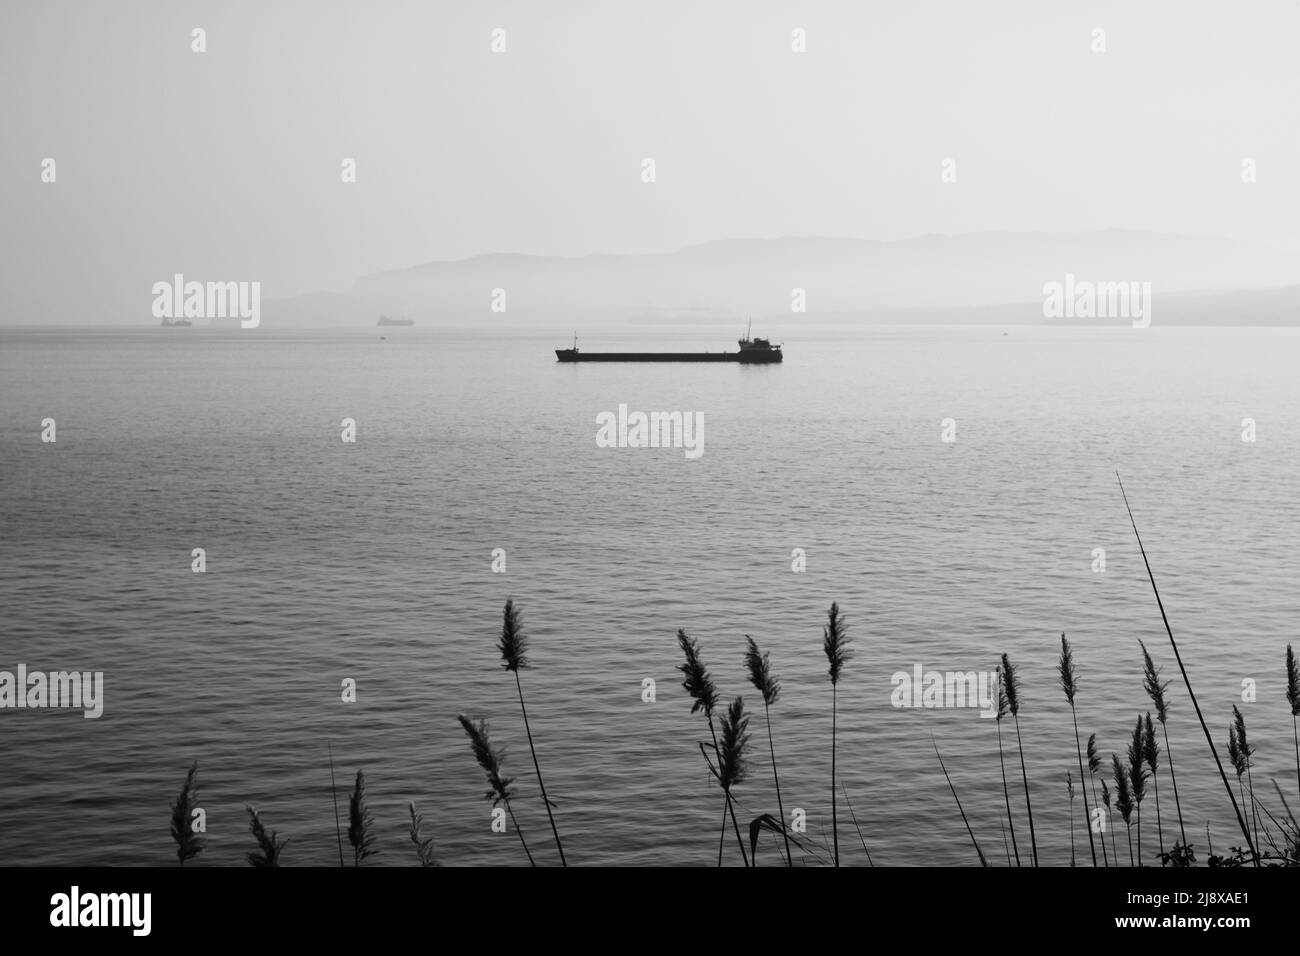 A black and white photo of a cargo ship in the sea Stock Photo